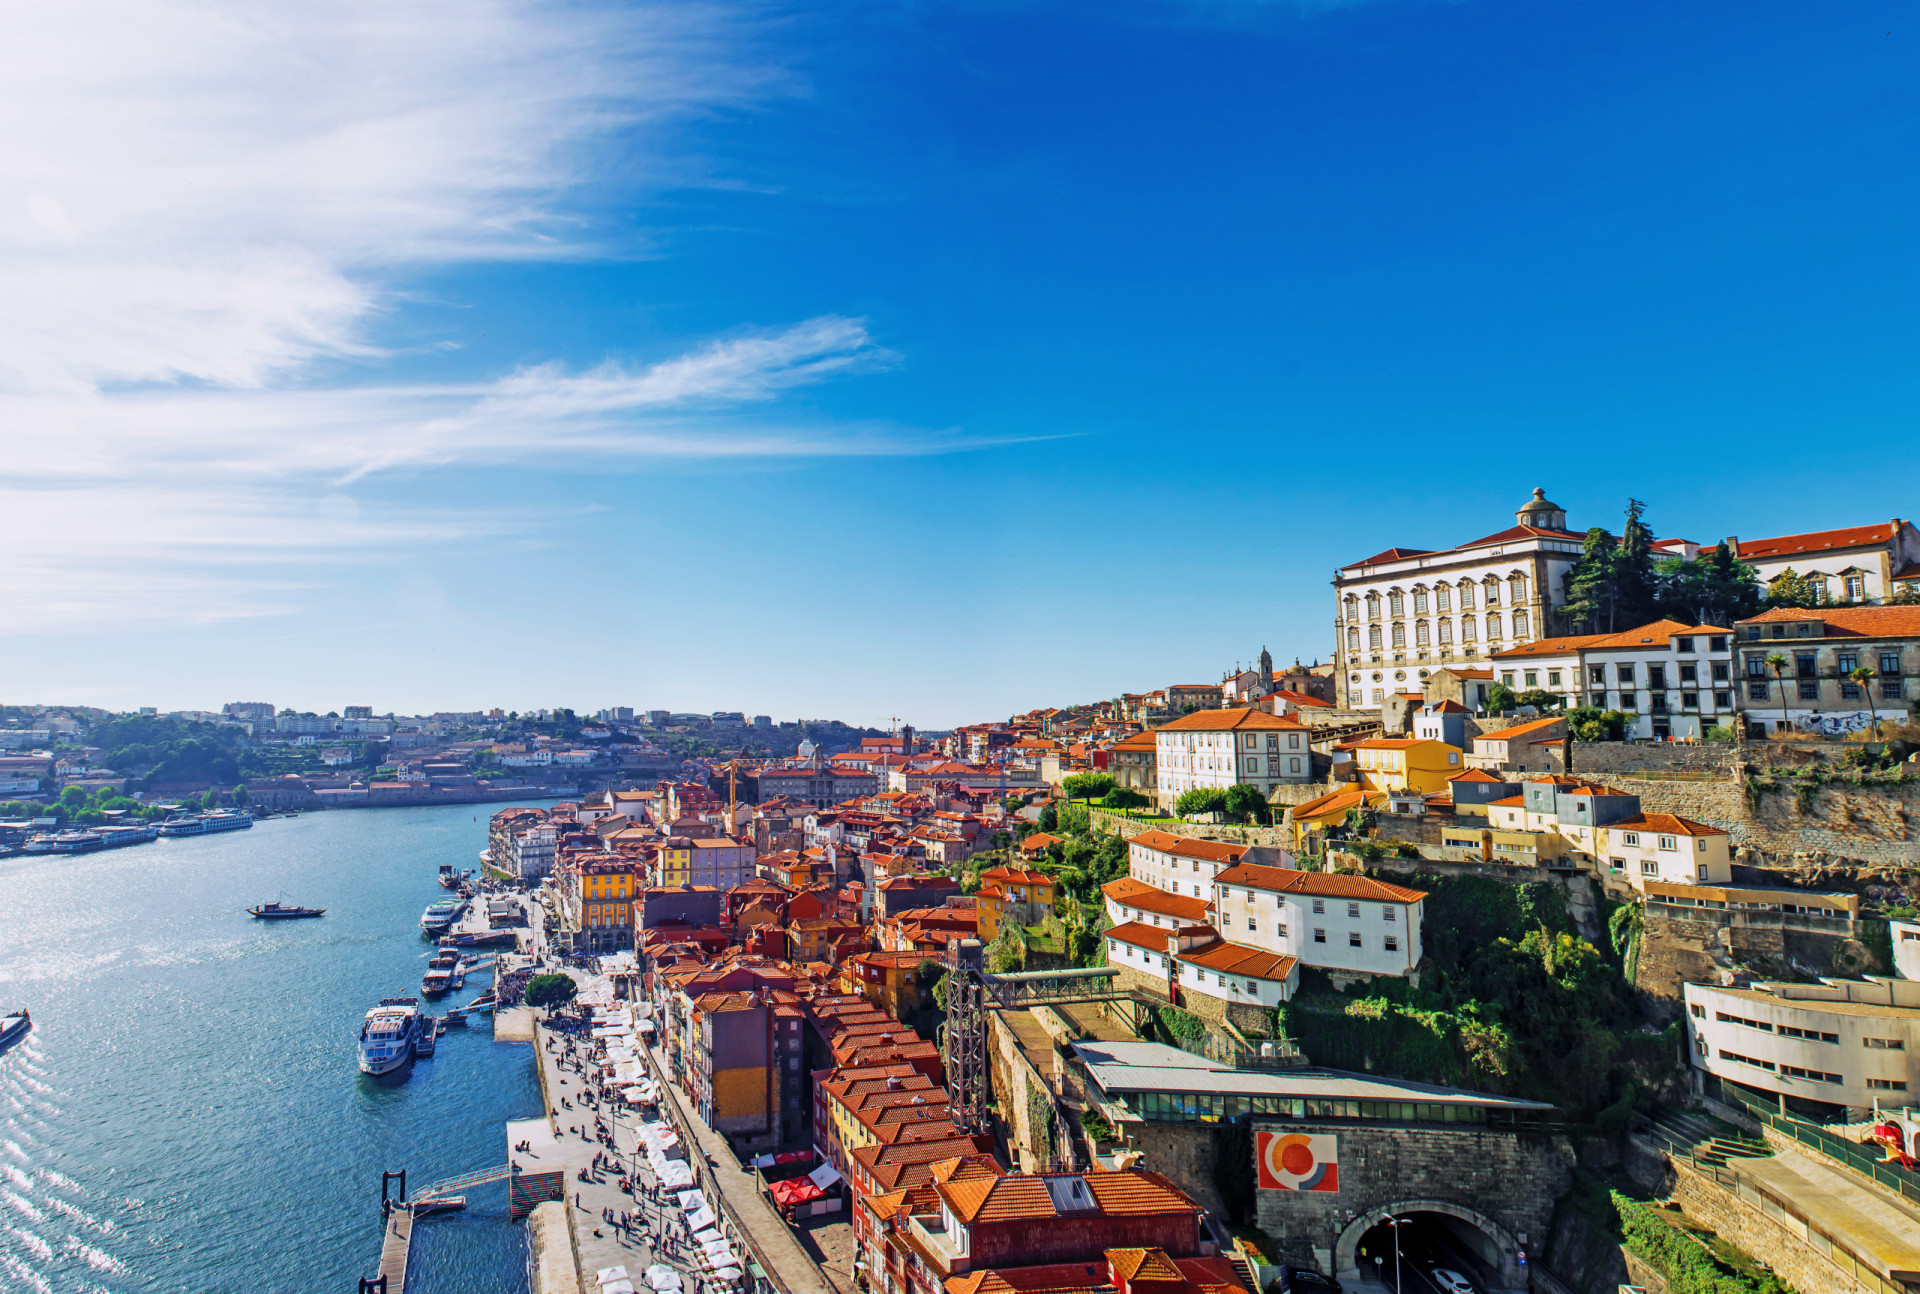 <p>Portugal has a low tourist tax of €2 (US$2.18) per night, which applies to all those over the age of 13. It applies in 13 Portuguese municipalities, including <a href="https://www.starsinsider.com/travel/233123/best-solo-travel-destinations-in-europe" rel="noopener">Lisbon</a> and Porto.</p><p>You may also like:<a href="https://www.starsinsider.com/n/356163?utm_source=msn.com&utm_medium=display&utm_campaign=referral_description&utm_content=683460en-ph"> The food industry's biggest scandals</a></p>